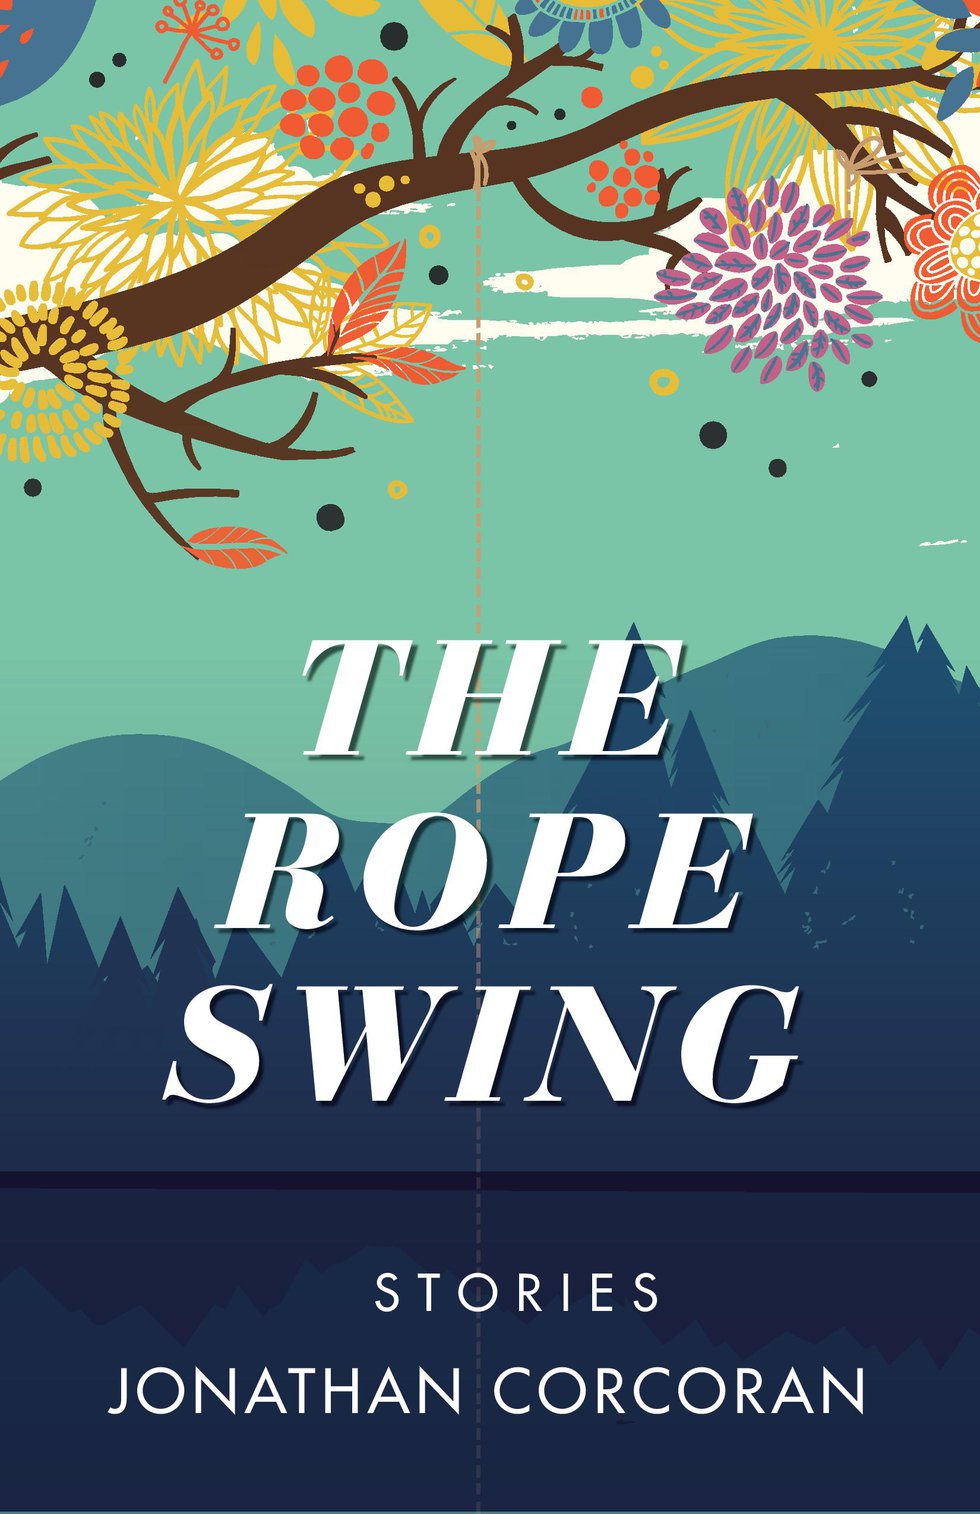 Carter Sickles and Johnathon Corcoran sign ‘The Rope Swing’